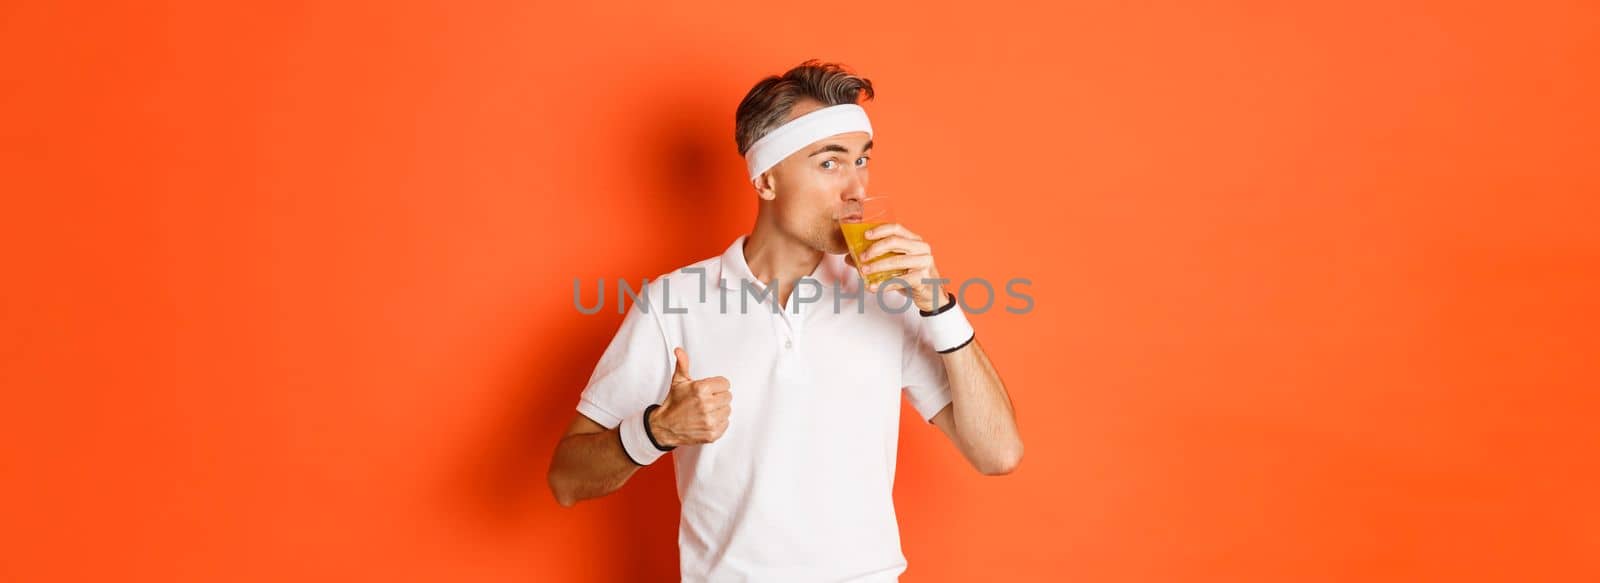 Concept of workout, gym and lifestyle. Portrait of handsome middle-aged fitness guy, showing thumbs-up and drinking juice, standing over orange background.